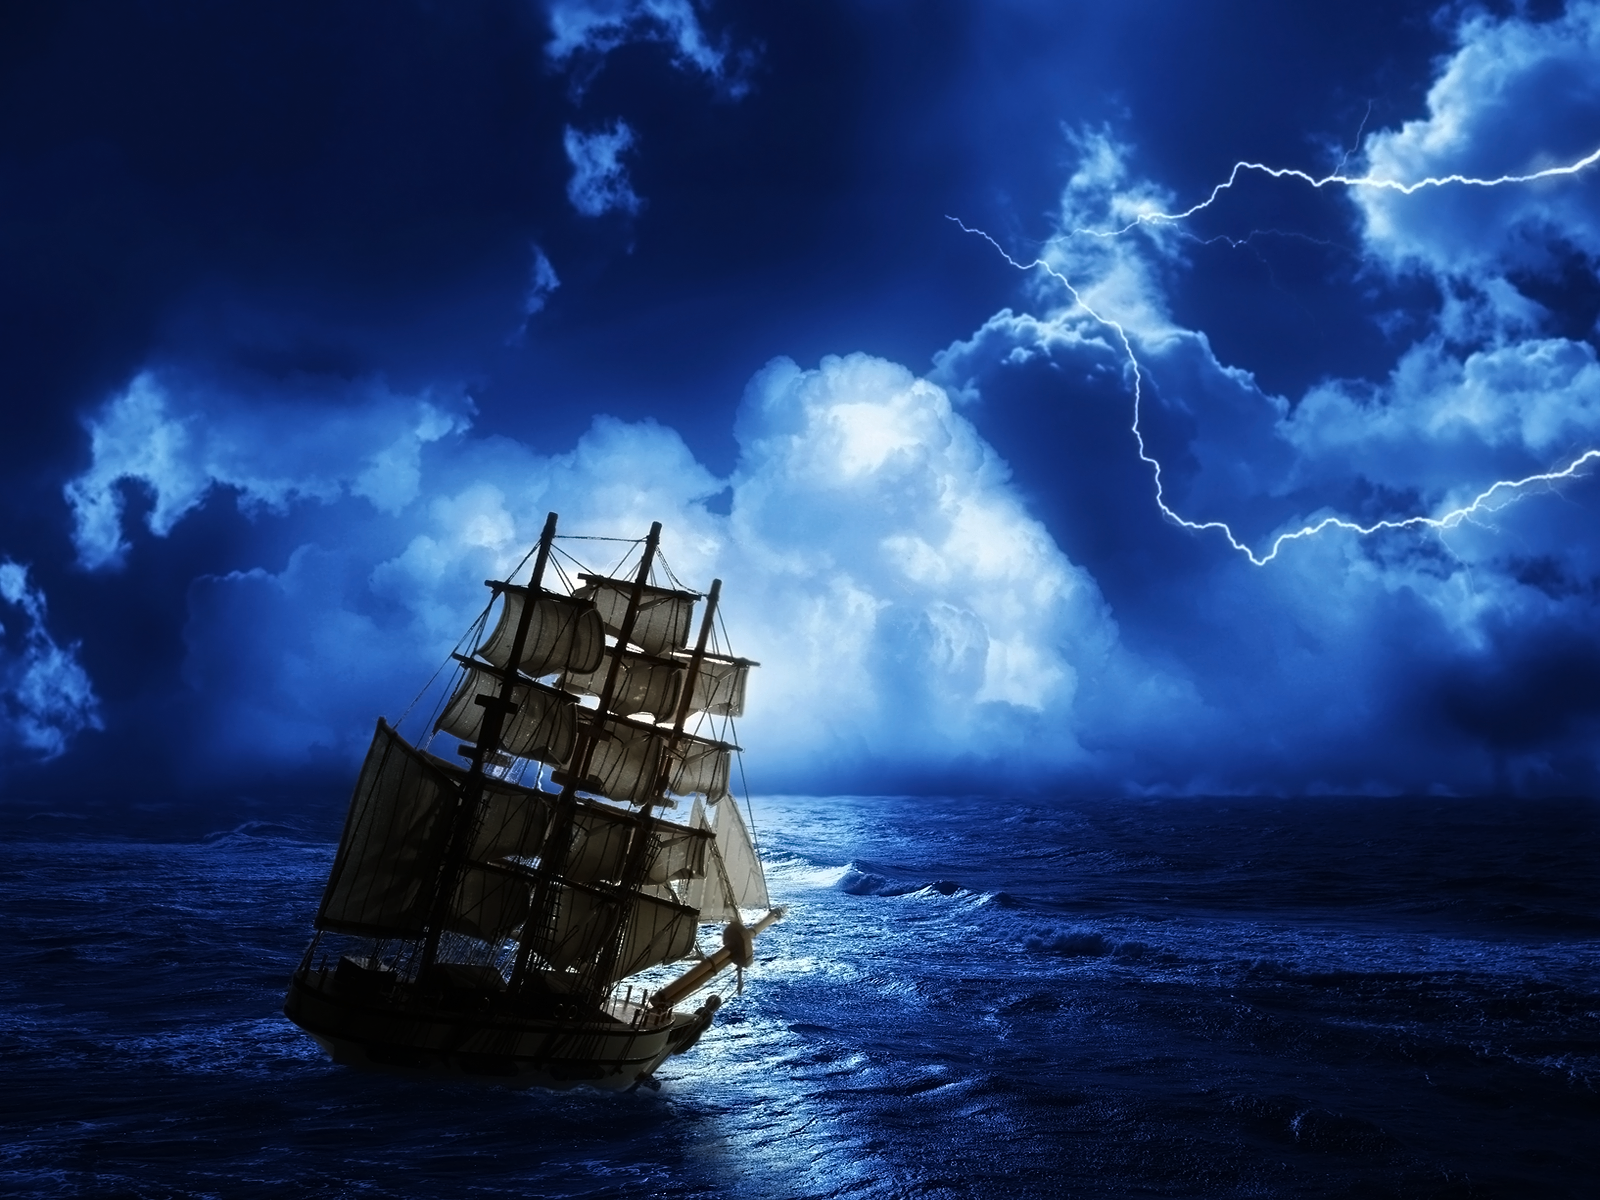 Old Sailing Ship and Storm wallpaper Some Call it Terrorism and